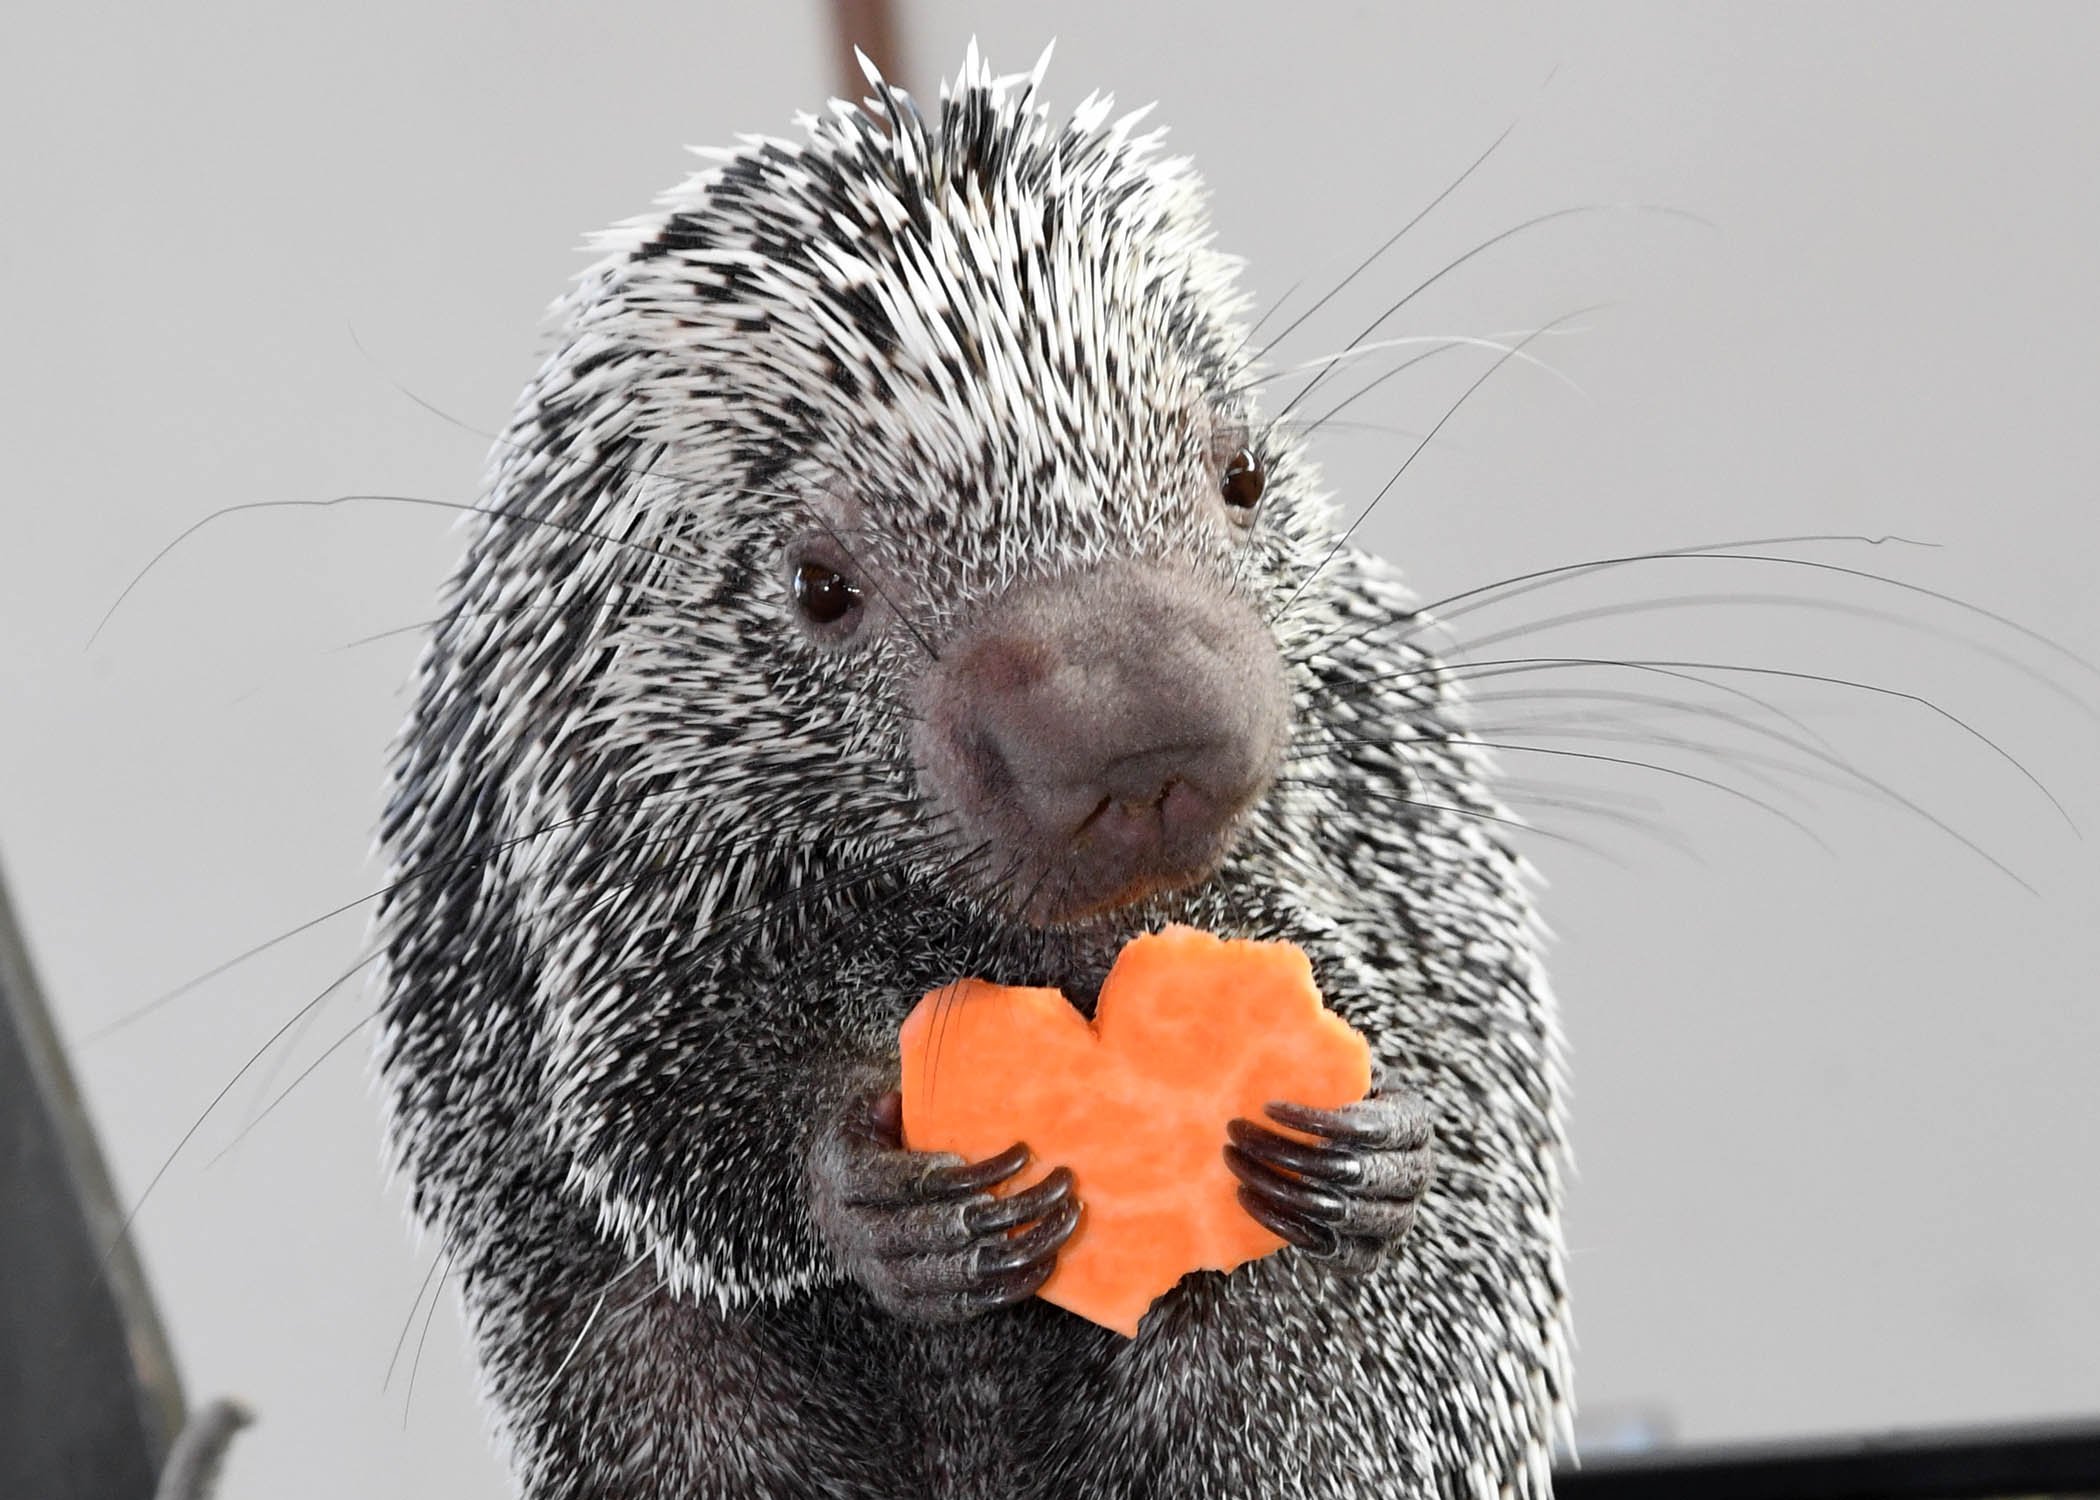 Quilbert the porcupine, clutching his sweet potato Valentine's treat. (Jim Schulz / Chicago Zoological Society)